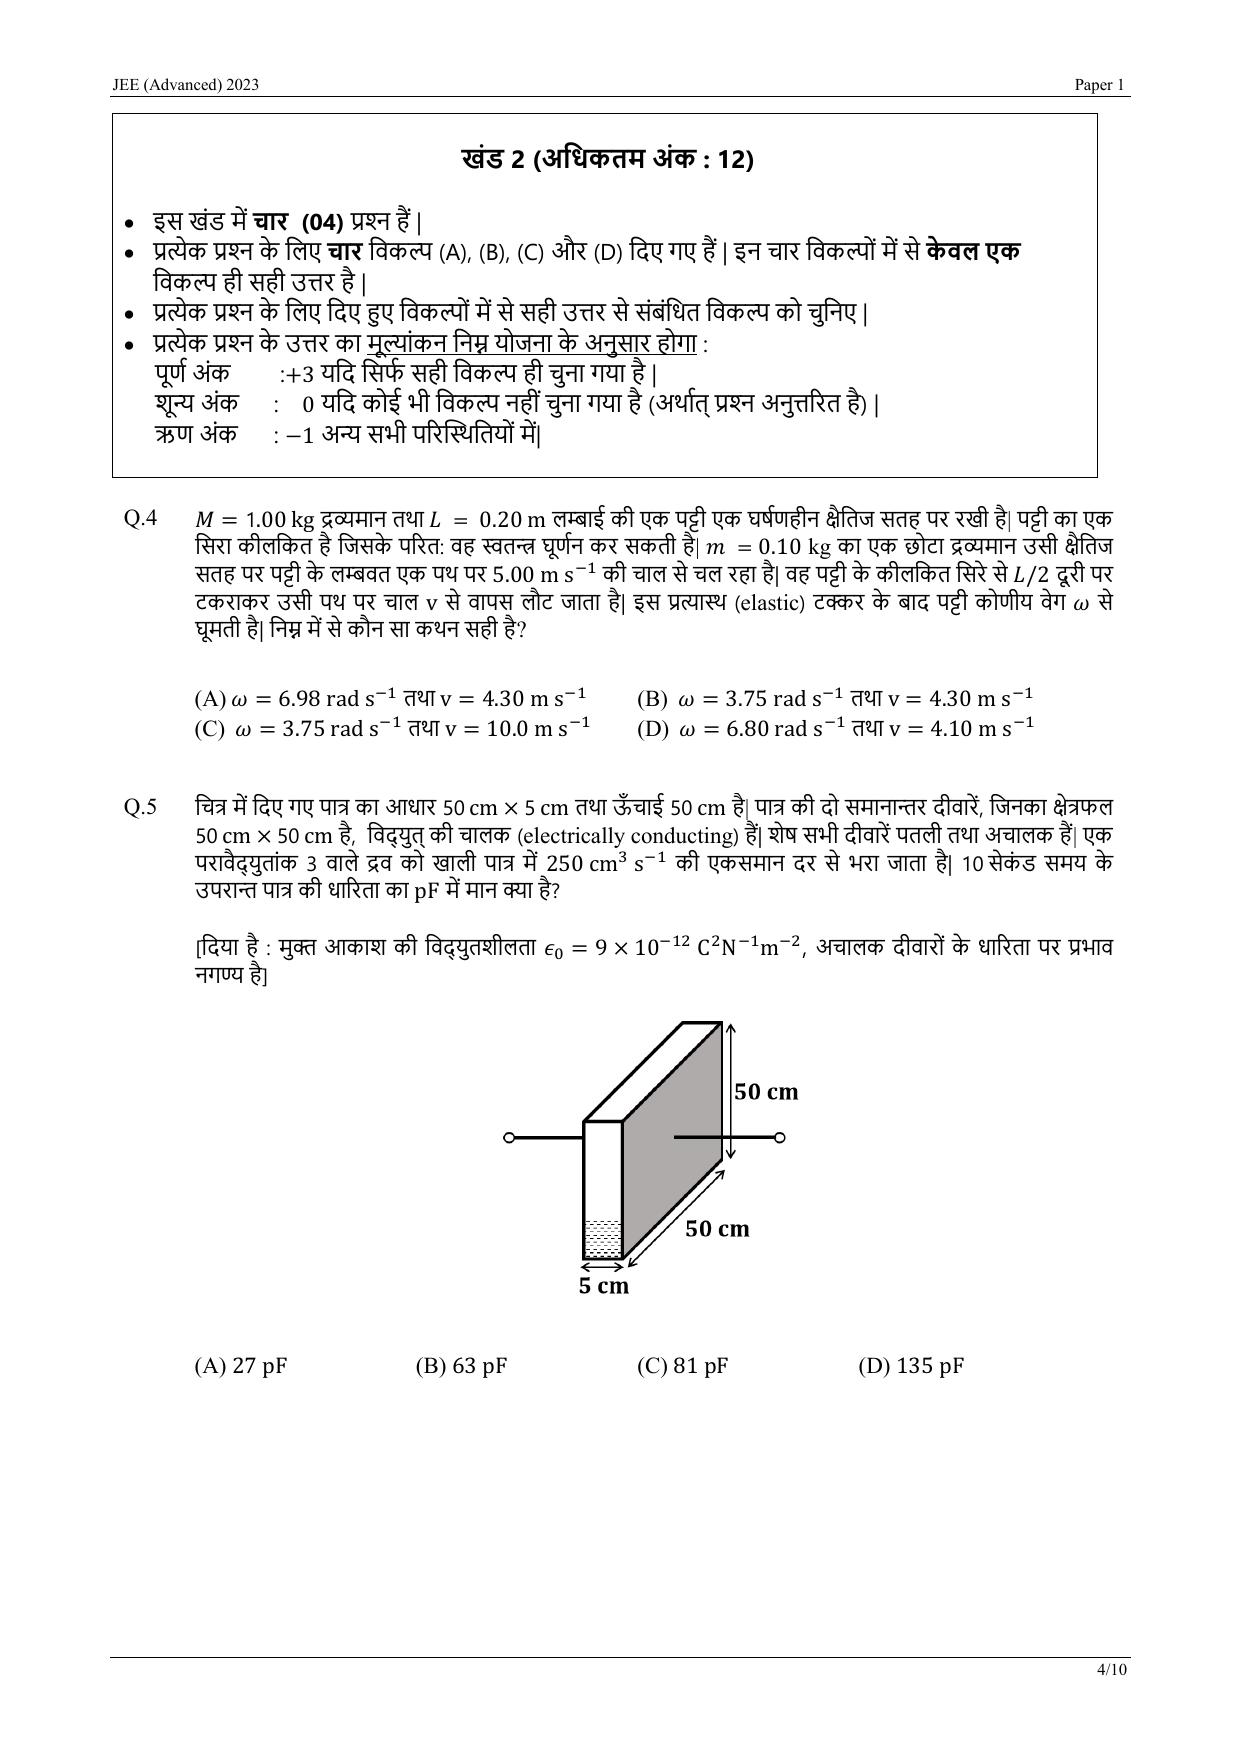 JEE Advanced 2023 Question Paper 1 (Hindi) - Page 14